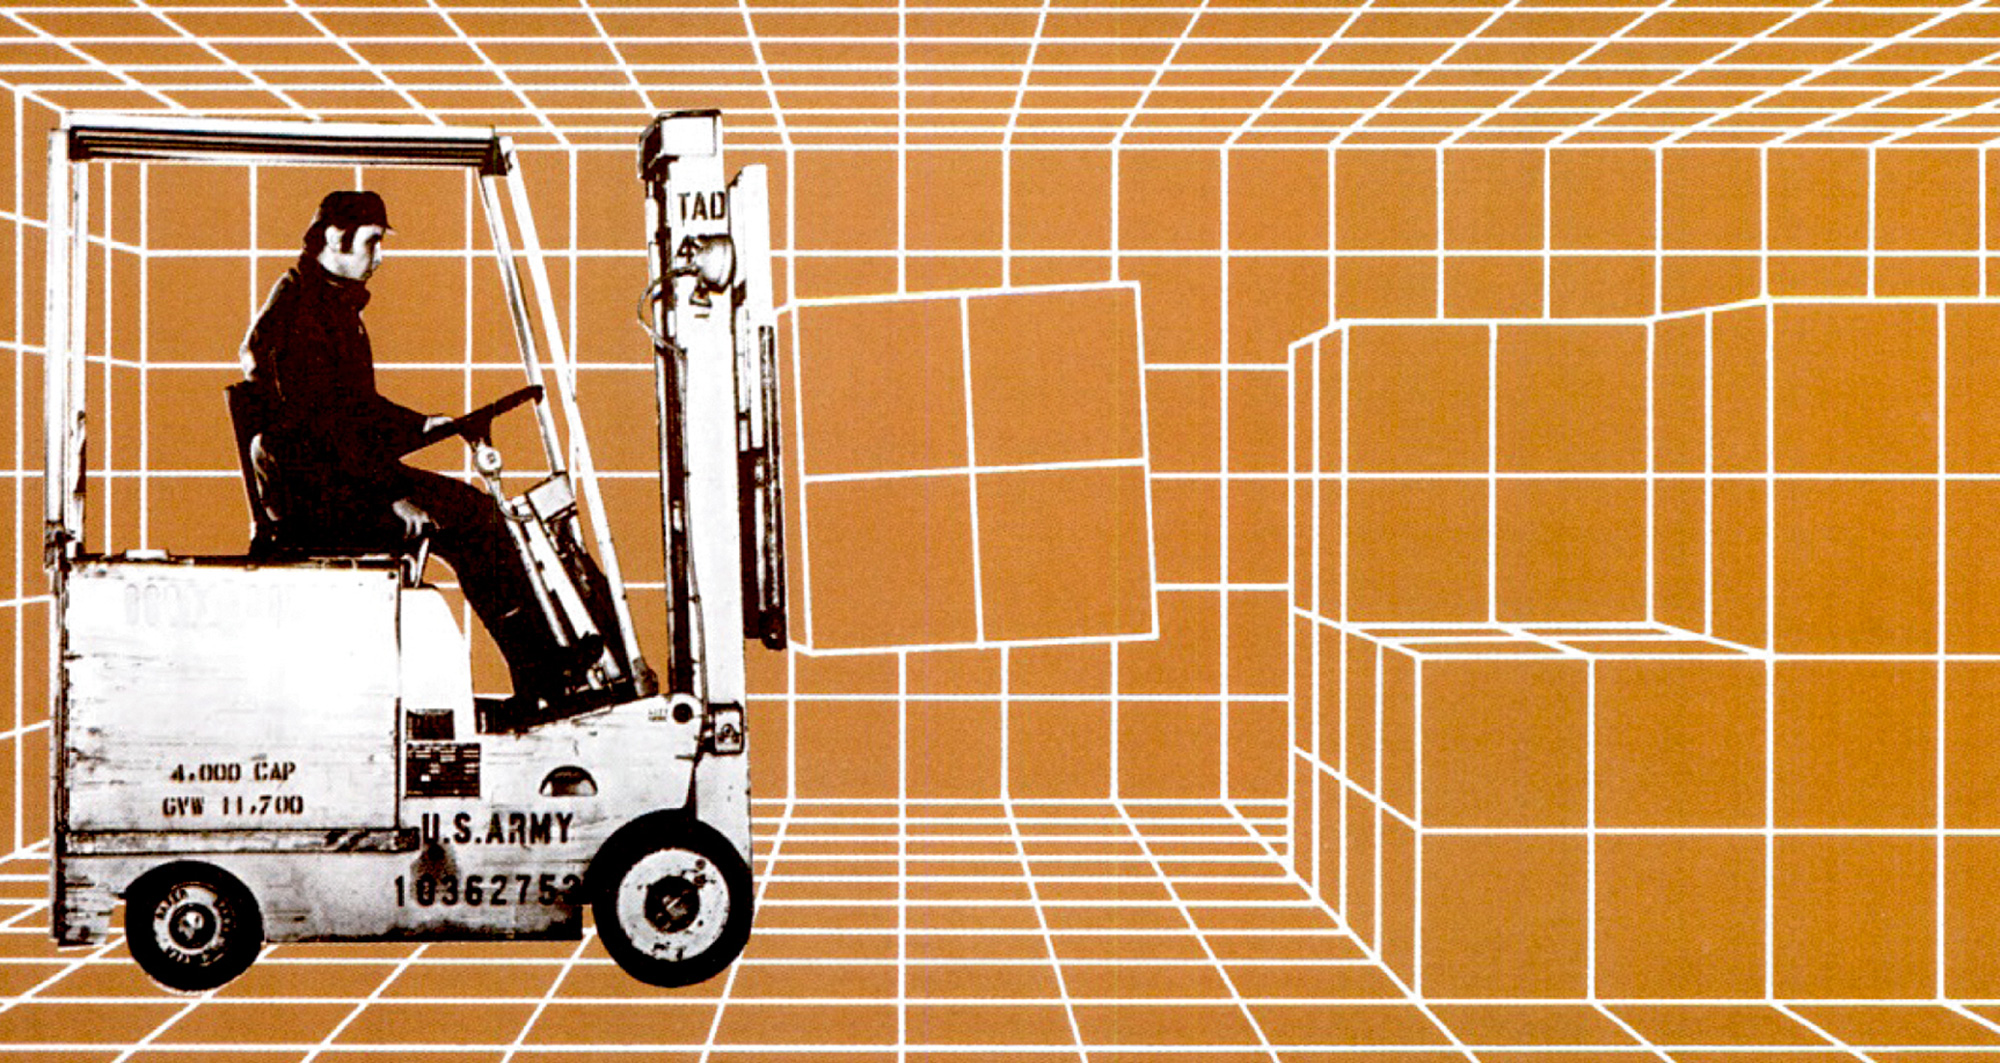 An eighteen eighty-three illustration from “Army Logistician,” showing a man operating a forklift as inventory and architecture merge into a blank surface.